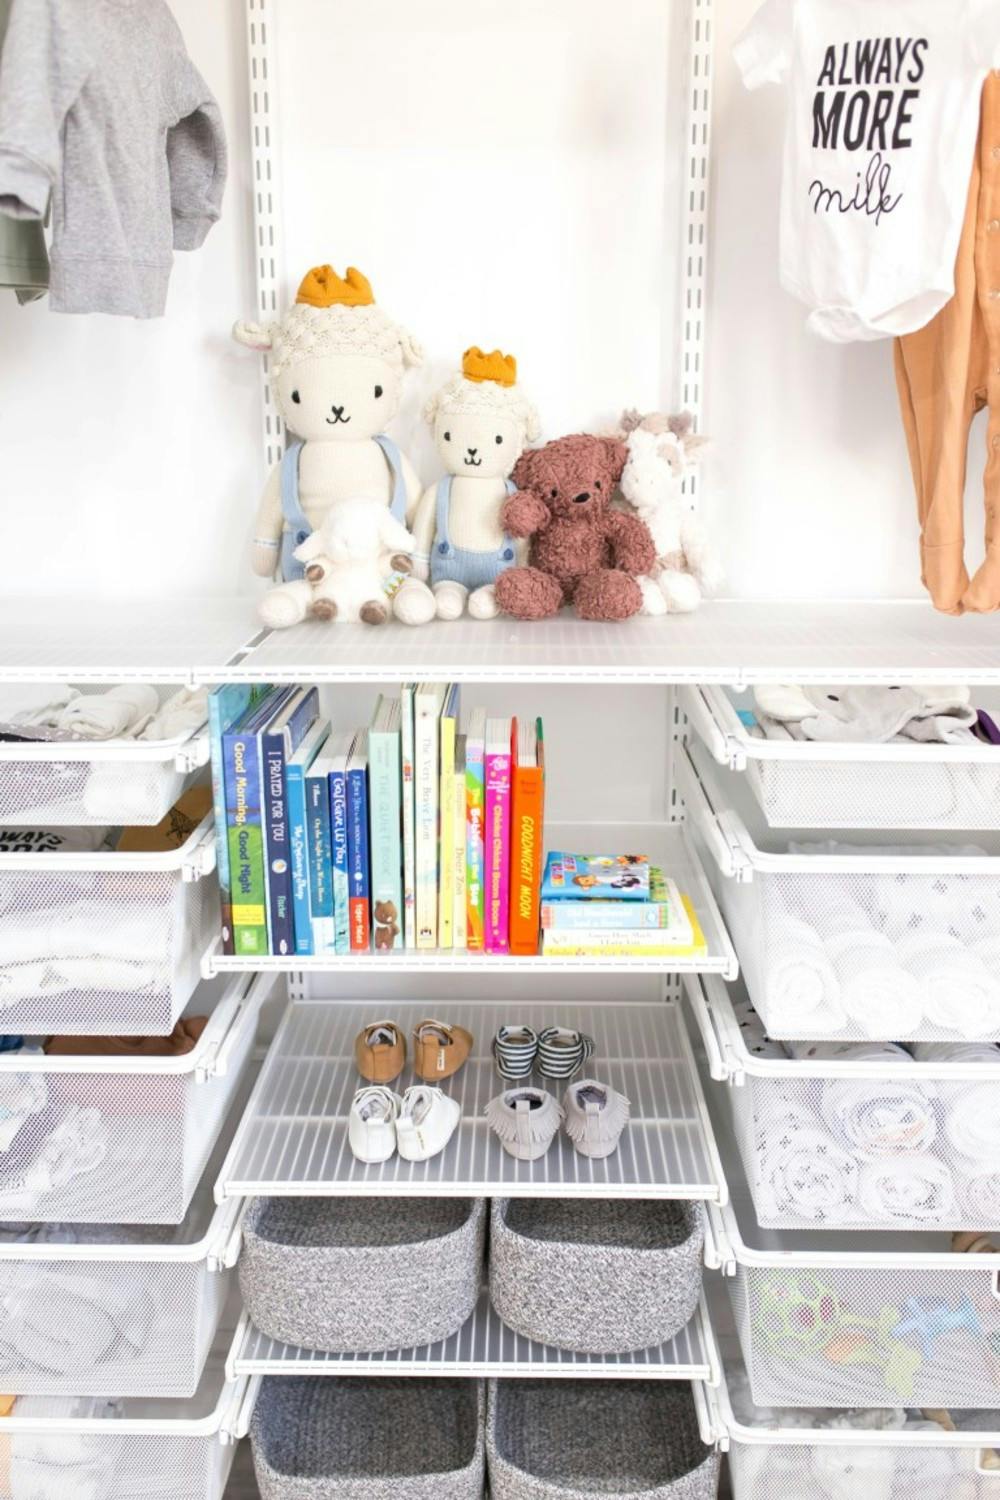 Keep baby bottle supplies organized with plastic storage containers.